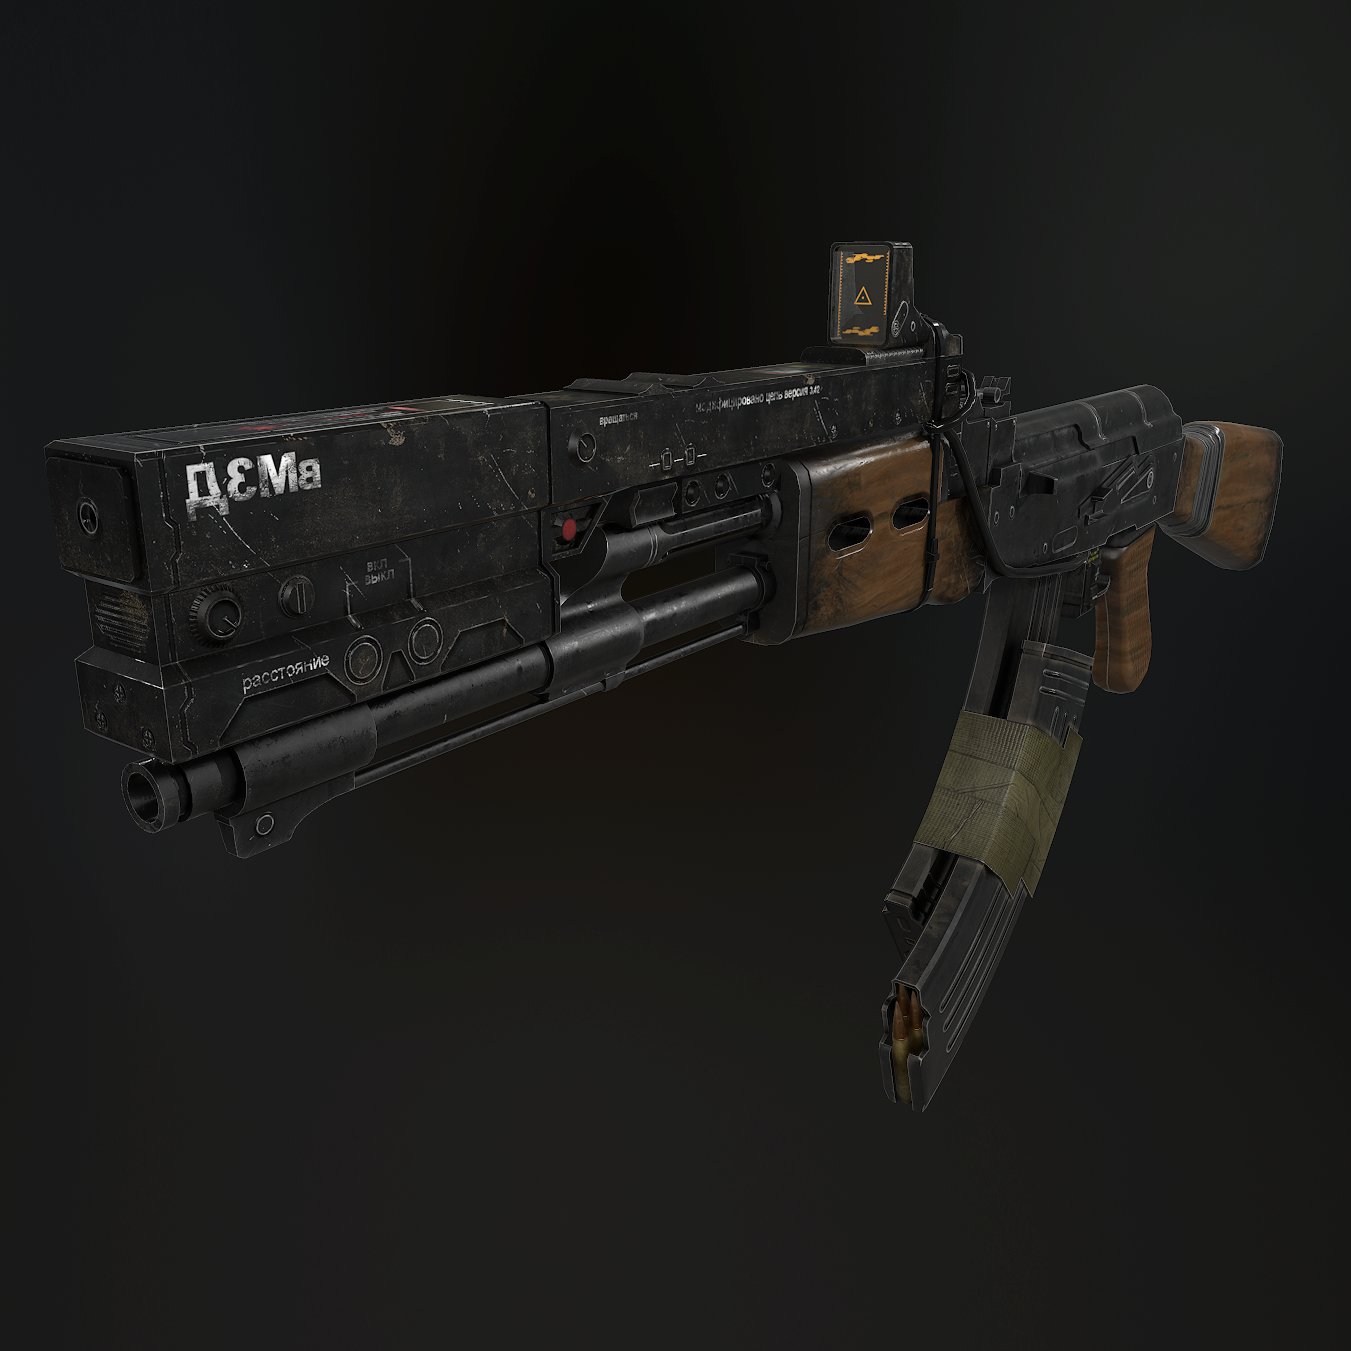 AK47 inspired from the movie Elysium (2013)8000K tris, 2048 X 2048 textures...